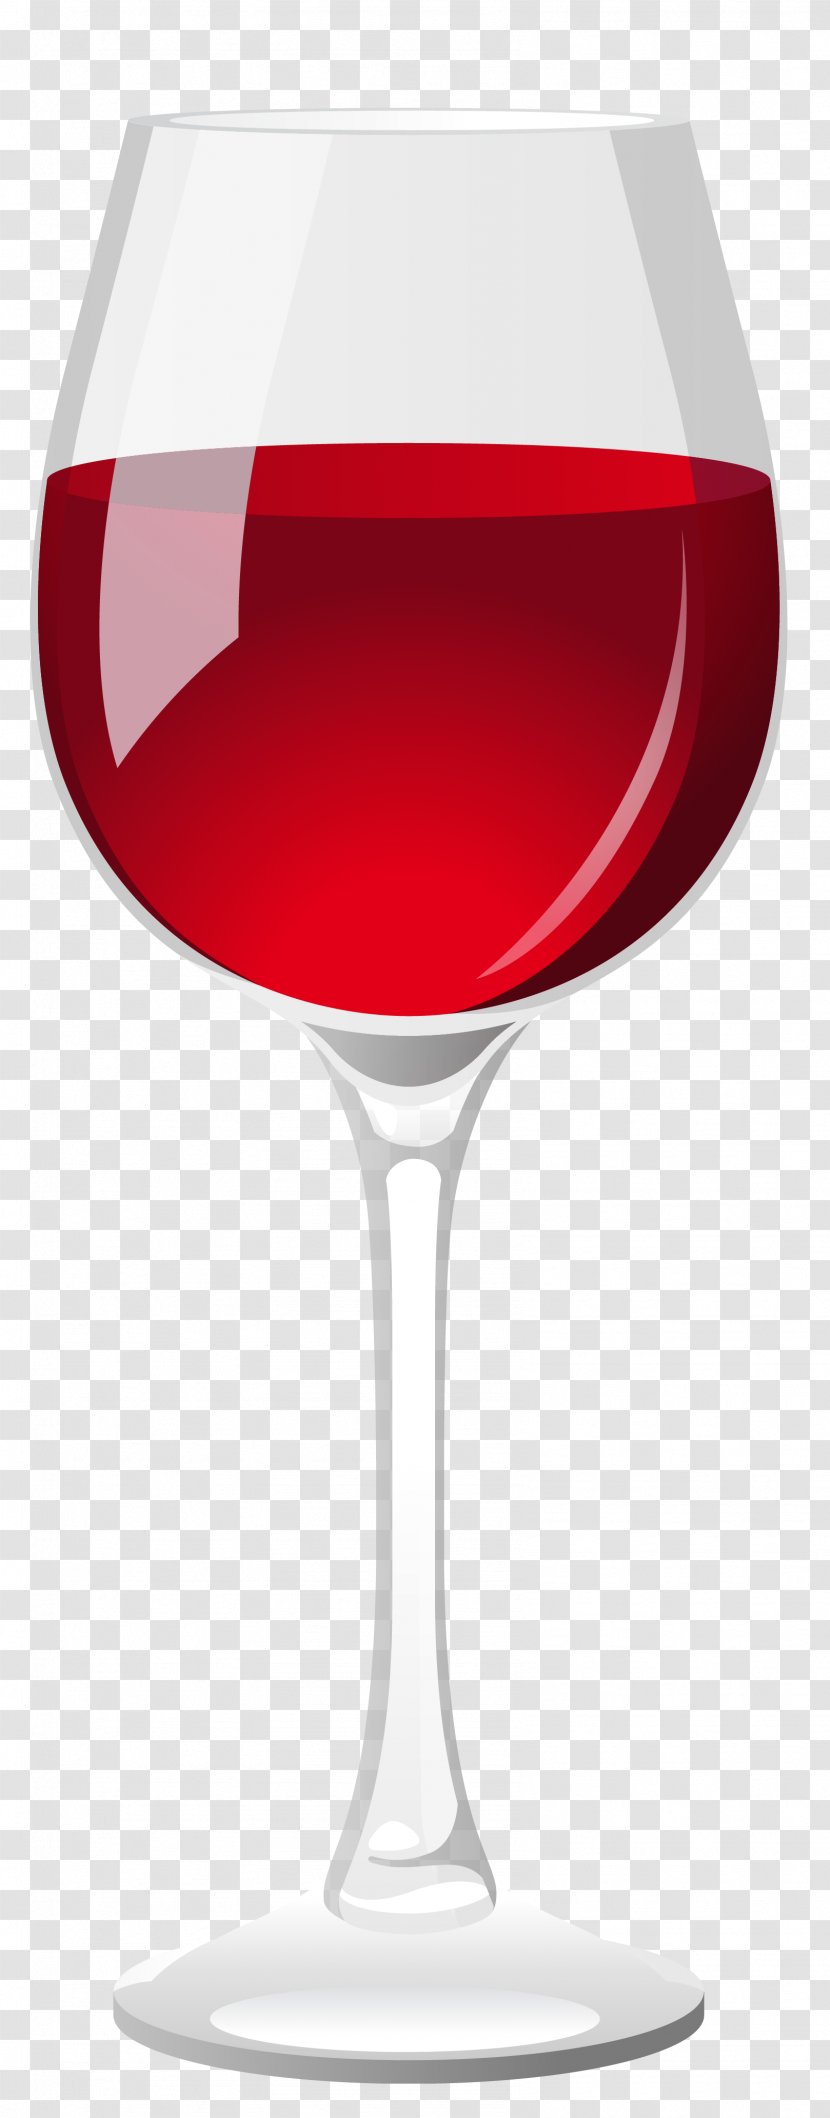 Red Wine Wassail Glass Clip Art - Alcoholic Drink - Icon Download Transparent PNG